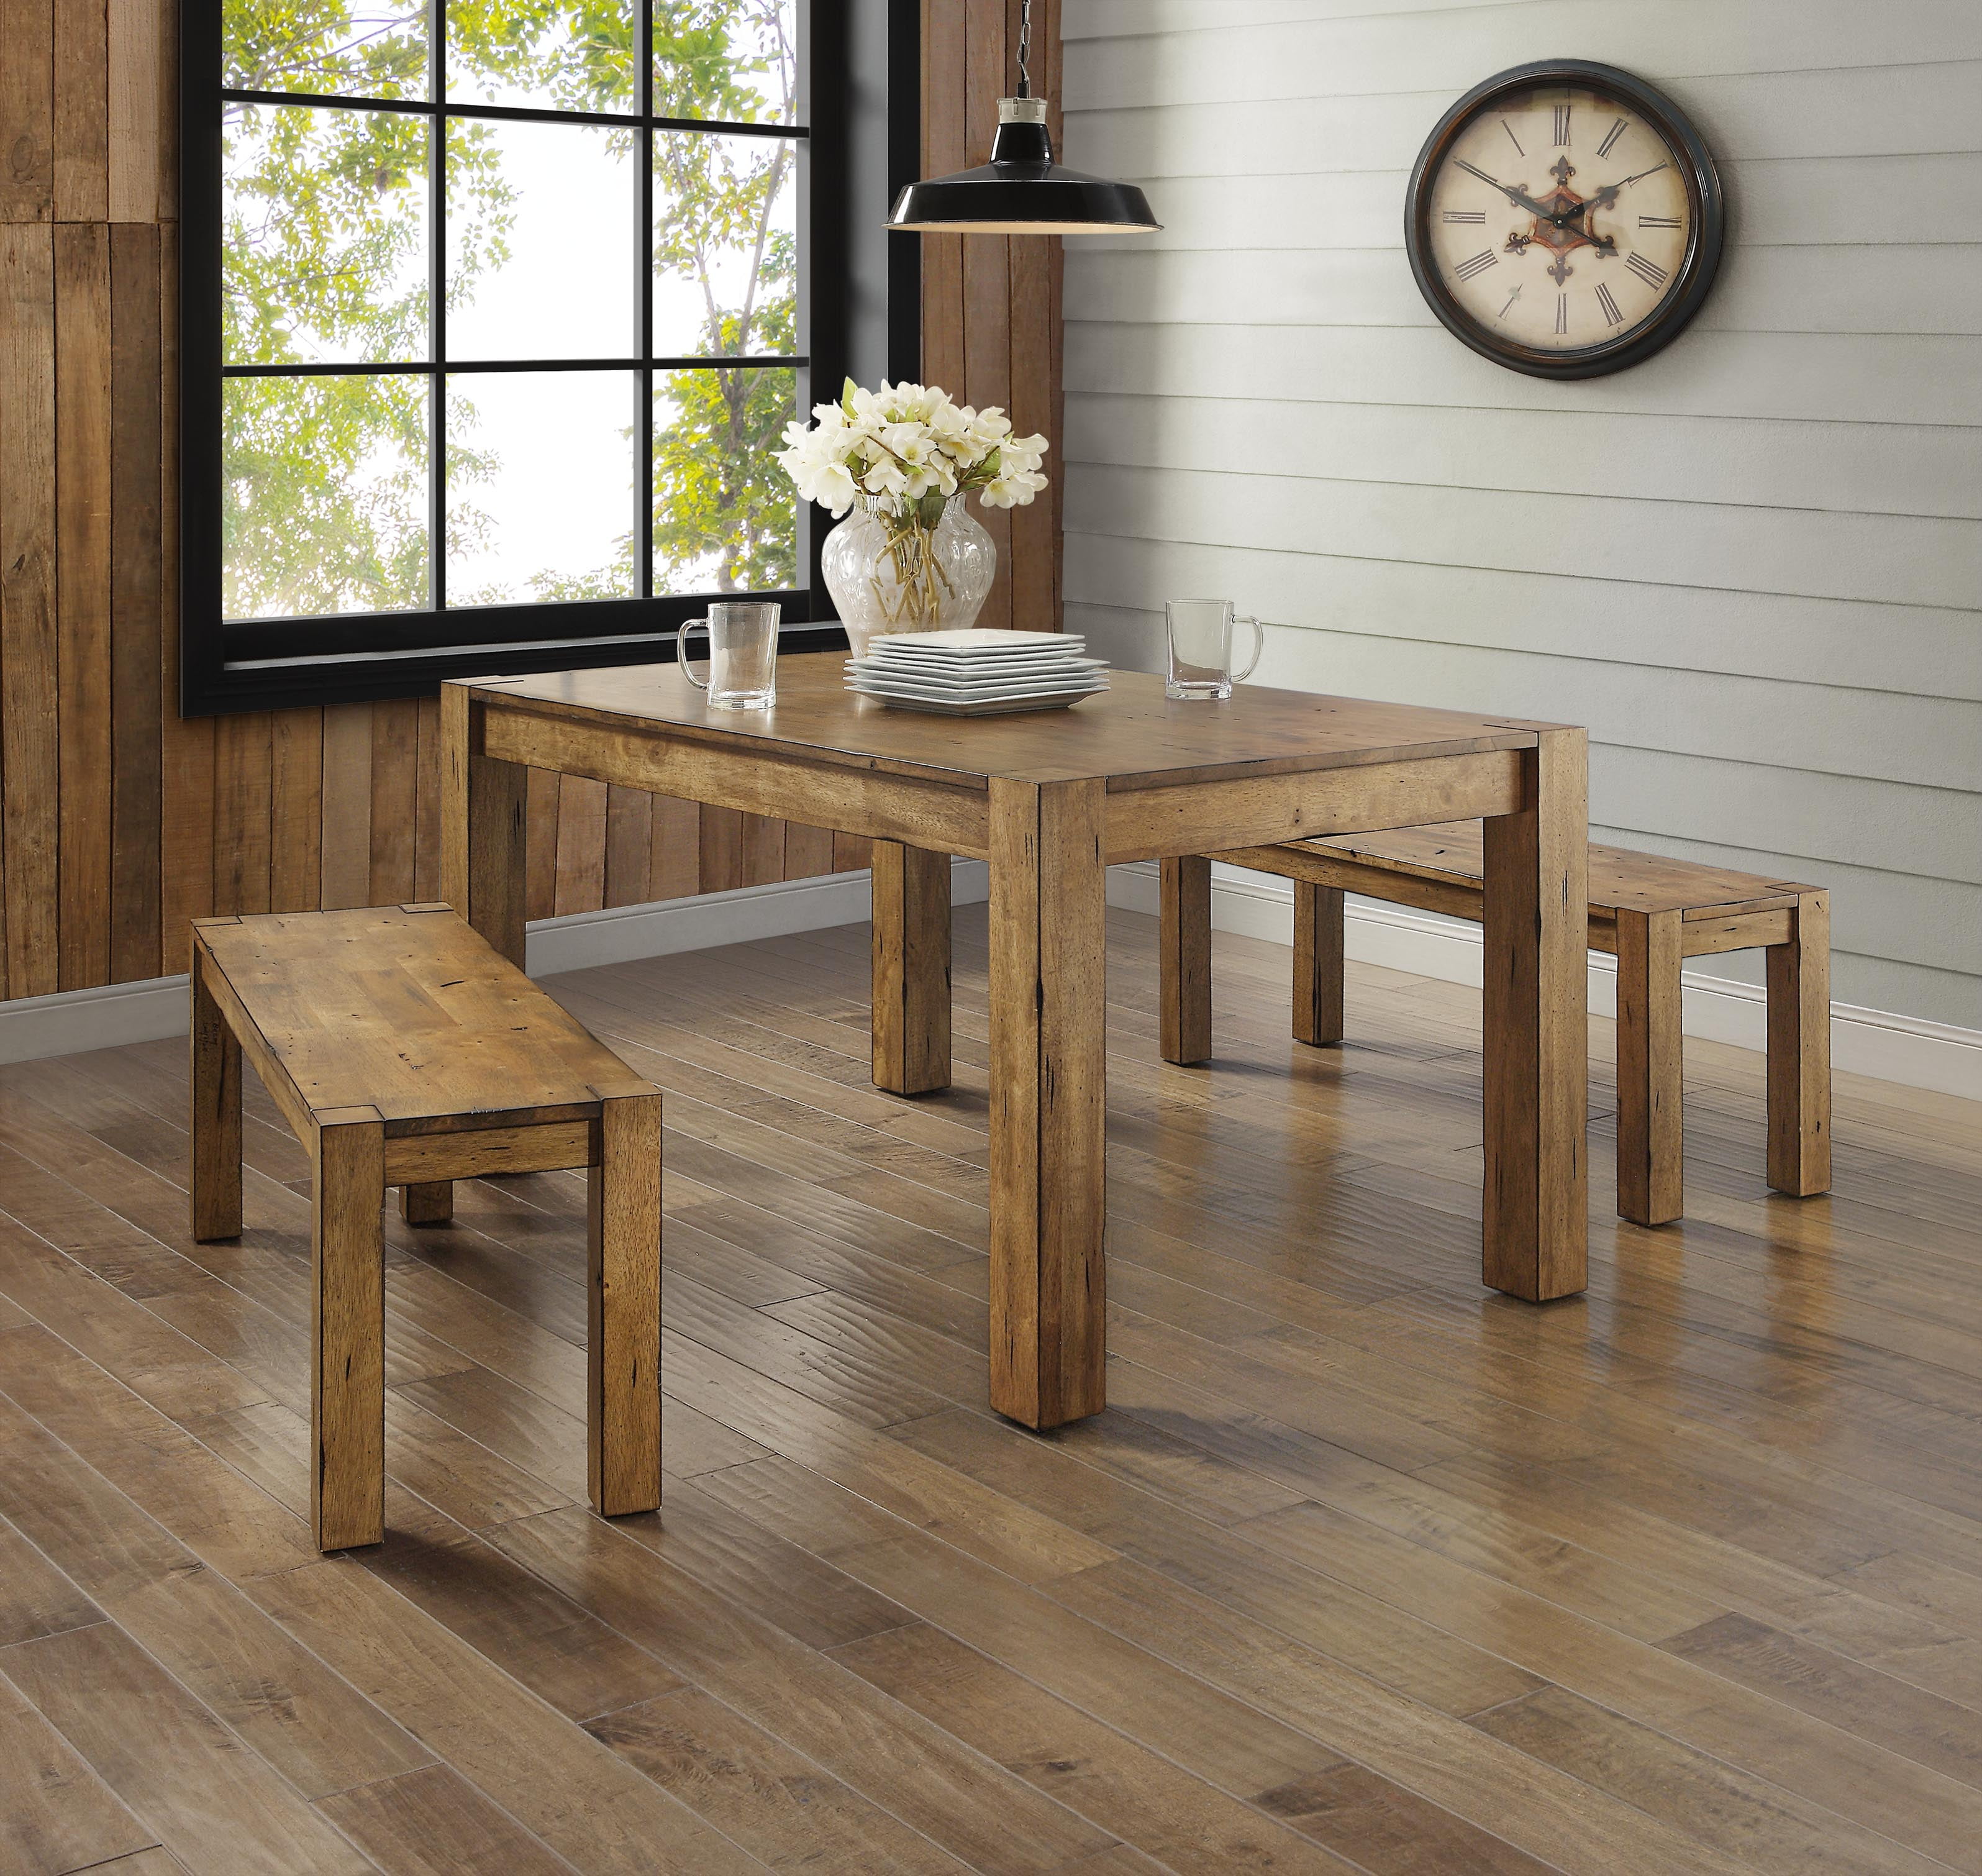 Rustic Wood Dining Table Brown Distressed Farmhouse Style Thick Legs